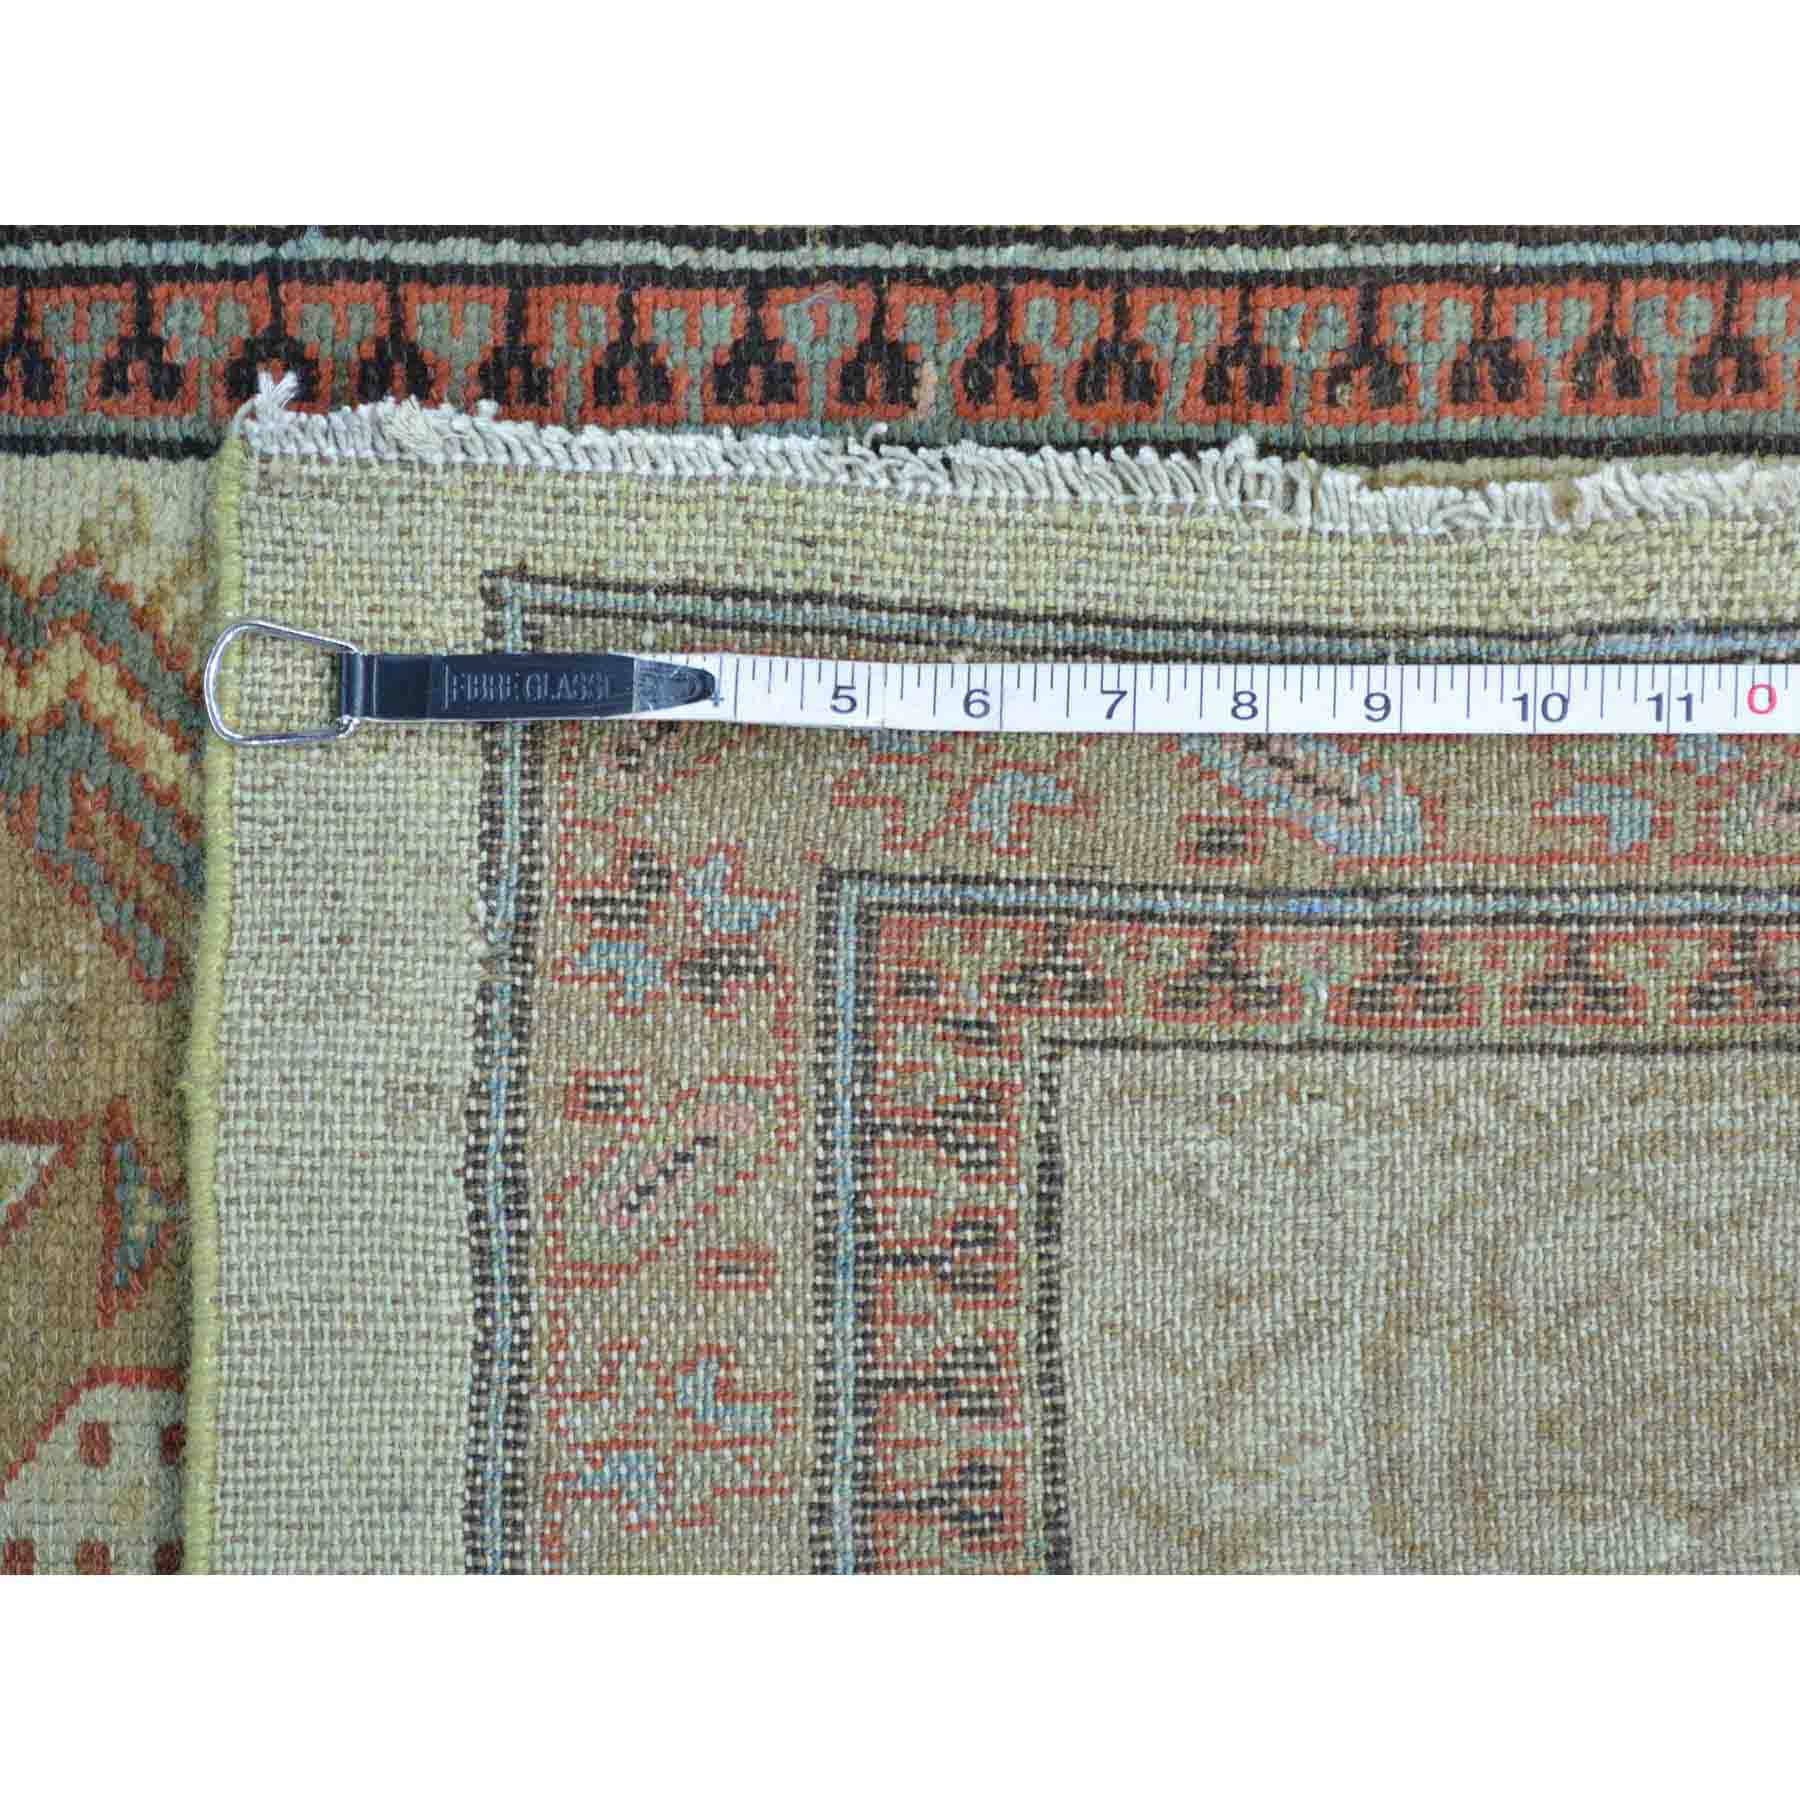 Antique-Hand-Knotted-Rug-132120